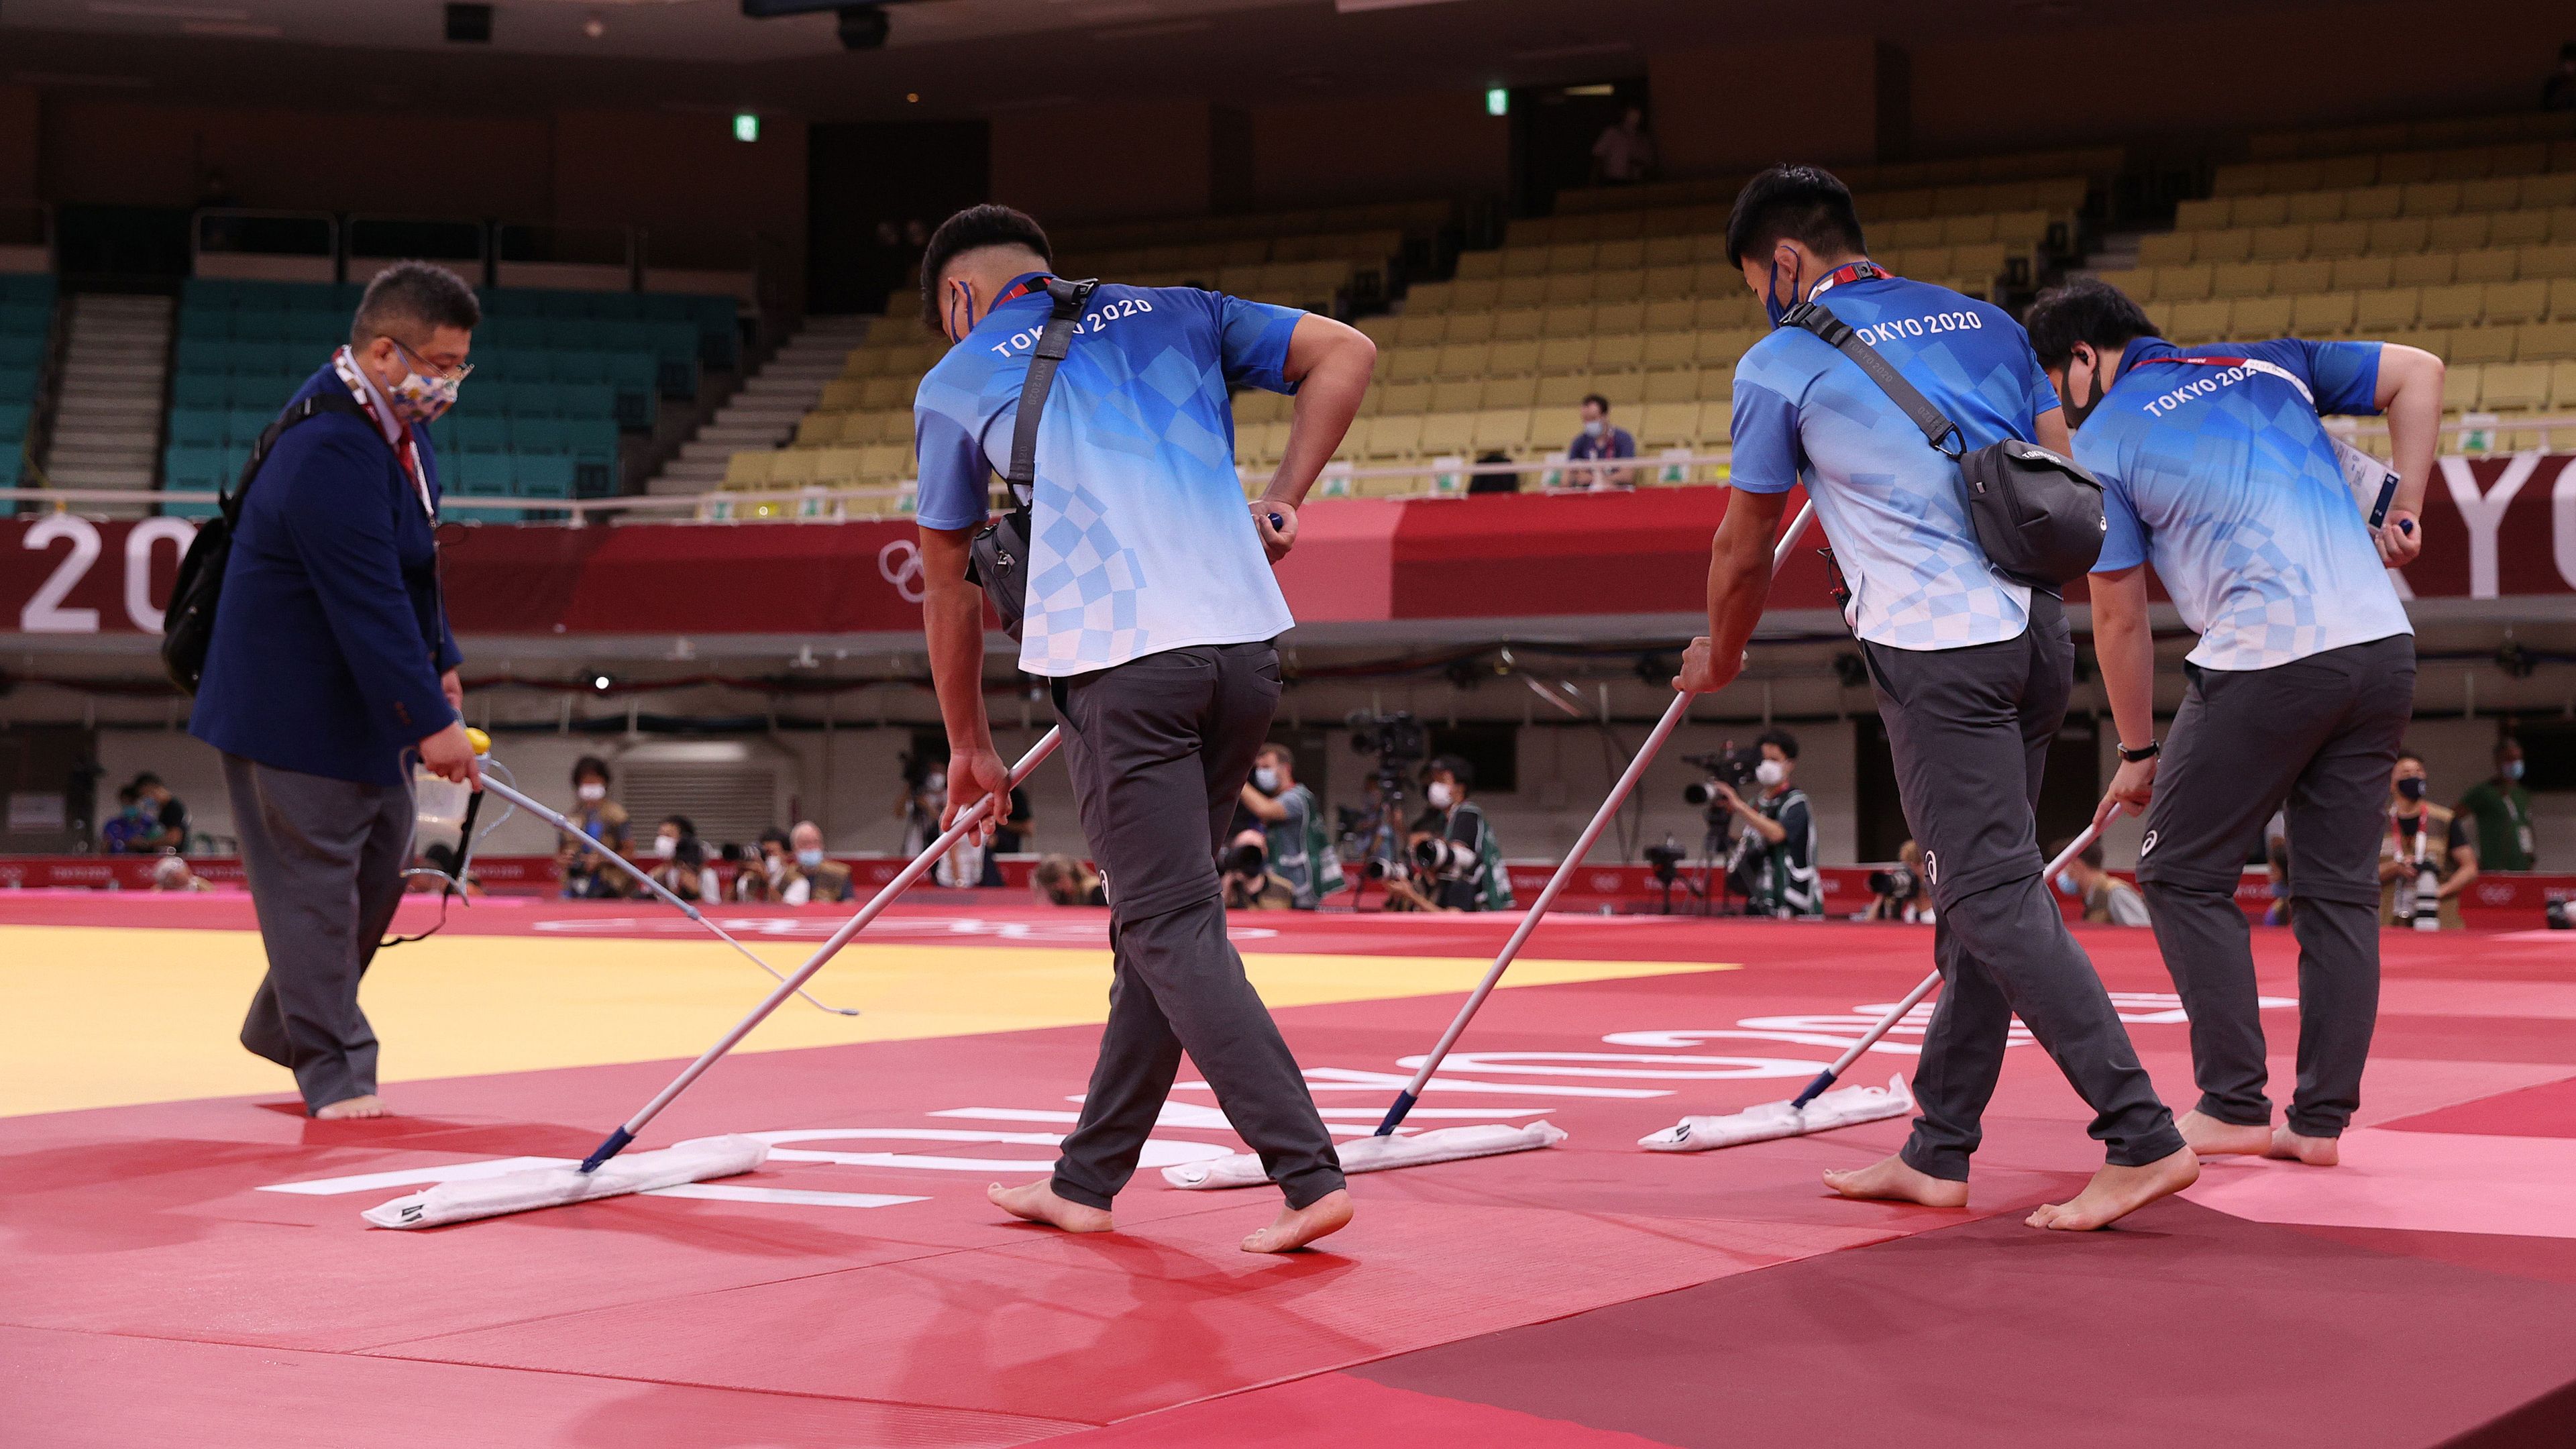 The judo arena is prepared by officials.